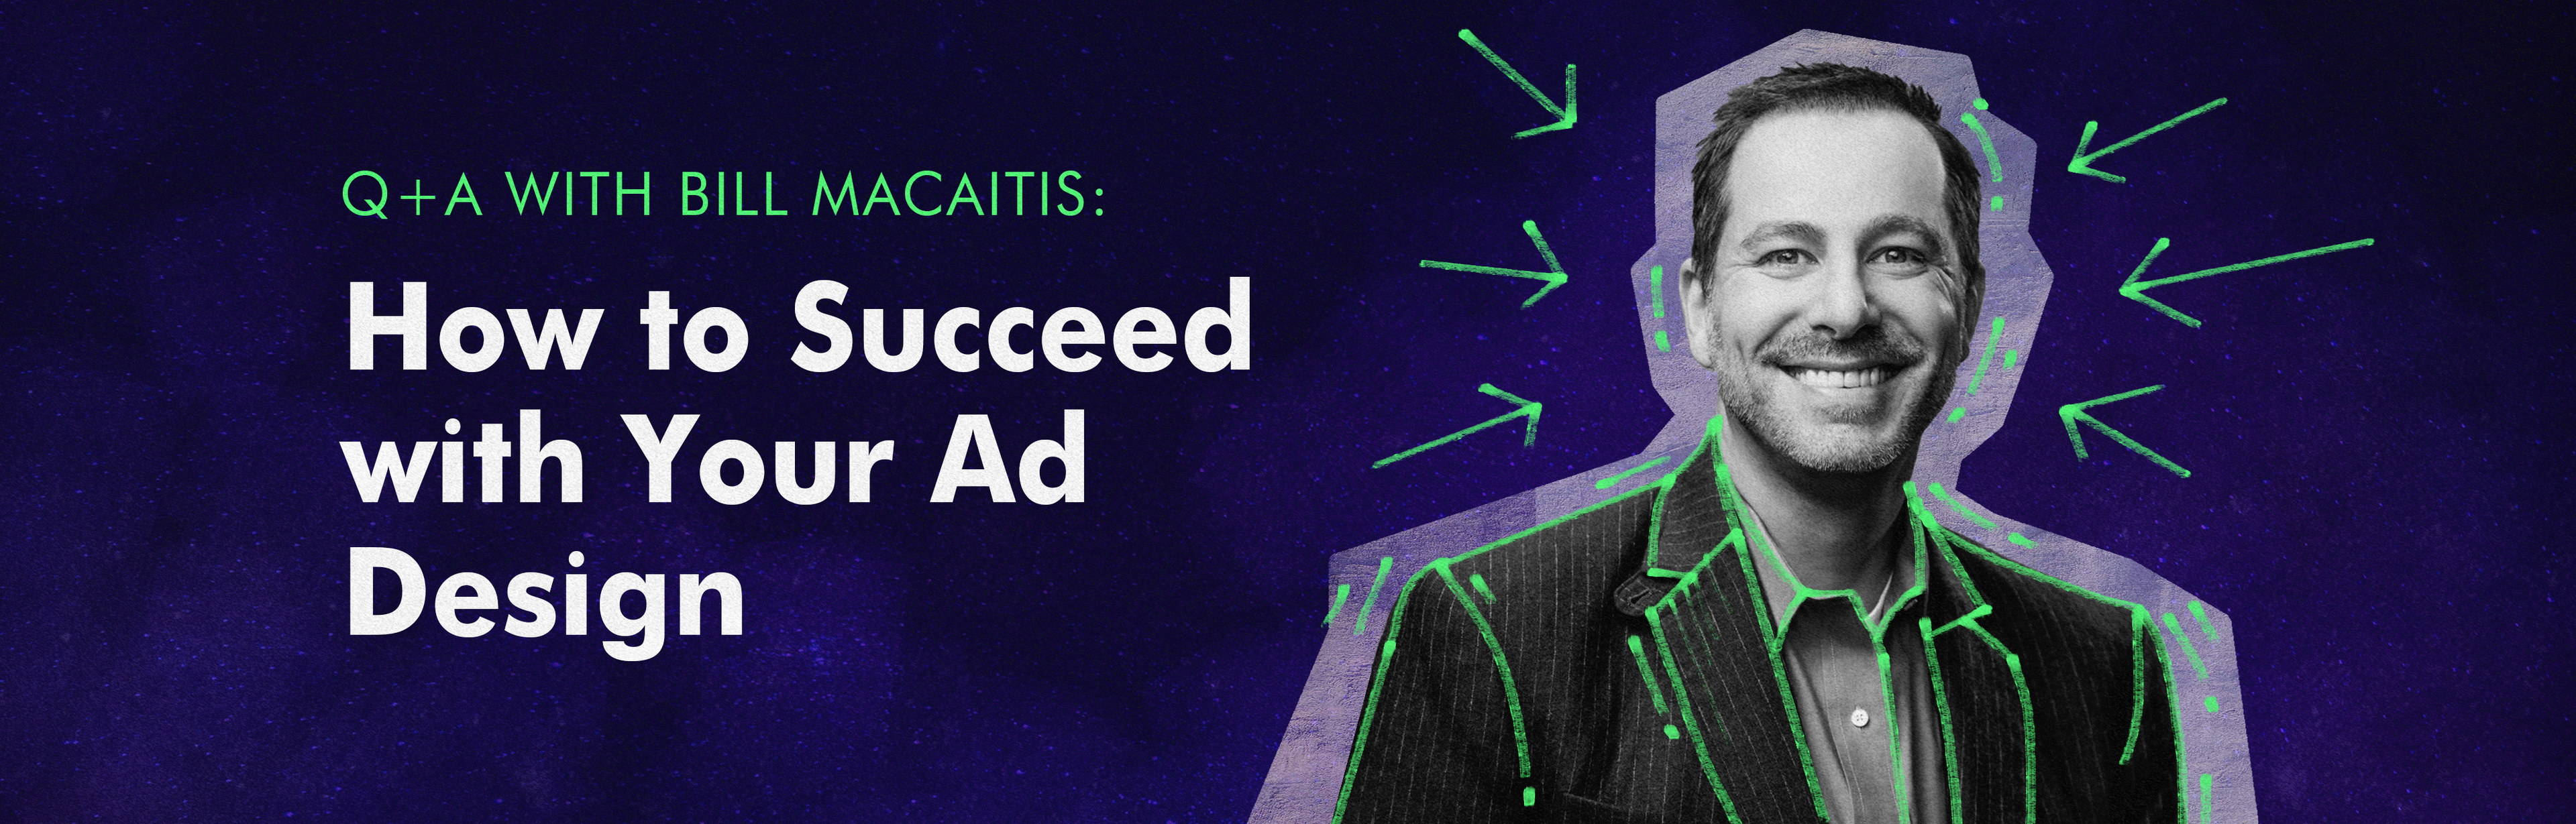 Q&A with Bill Macaitis: How to Succeed with Your Ad Design